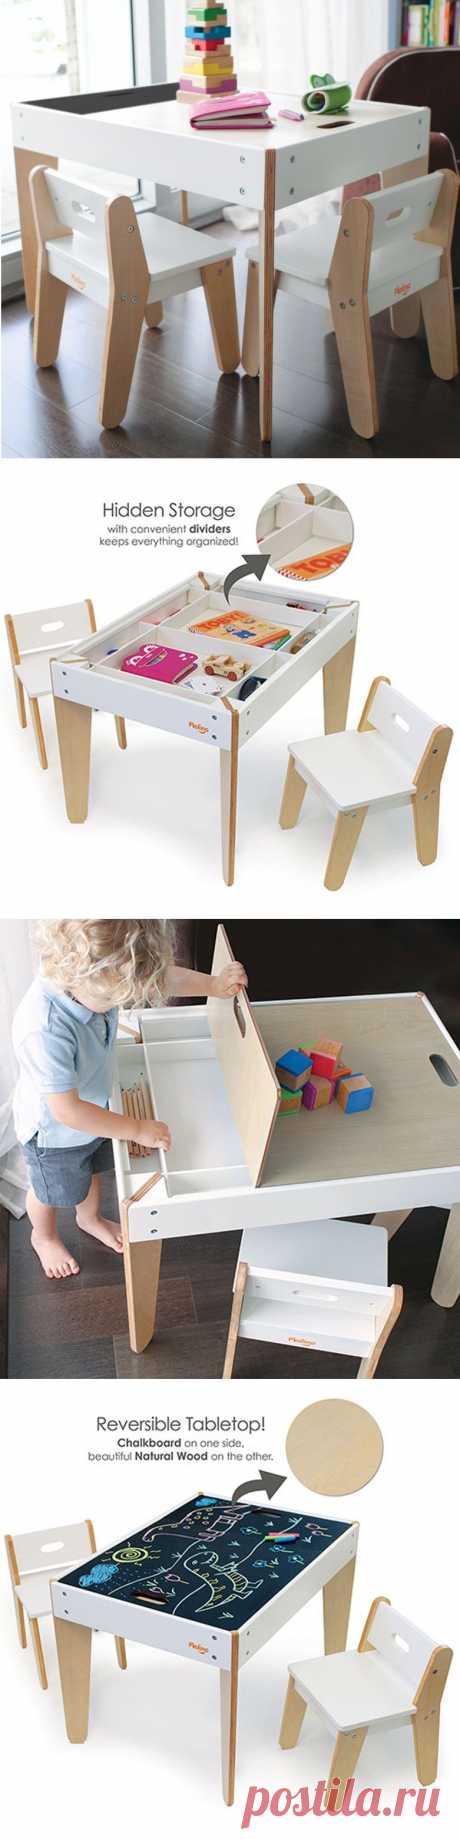 P'kolino Little Modern Children's Table with reversible top and built in storage compartment. This toddler table has reversible chalk table top (to quickly hide any mess) and two ergonomic child chairs. Playfully stylish design fits bedroom, playroom or family room. P’kolino meets or exceed US, EU, and Canadian safety standards.